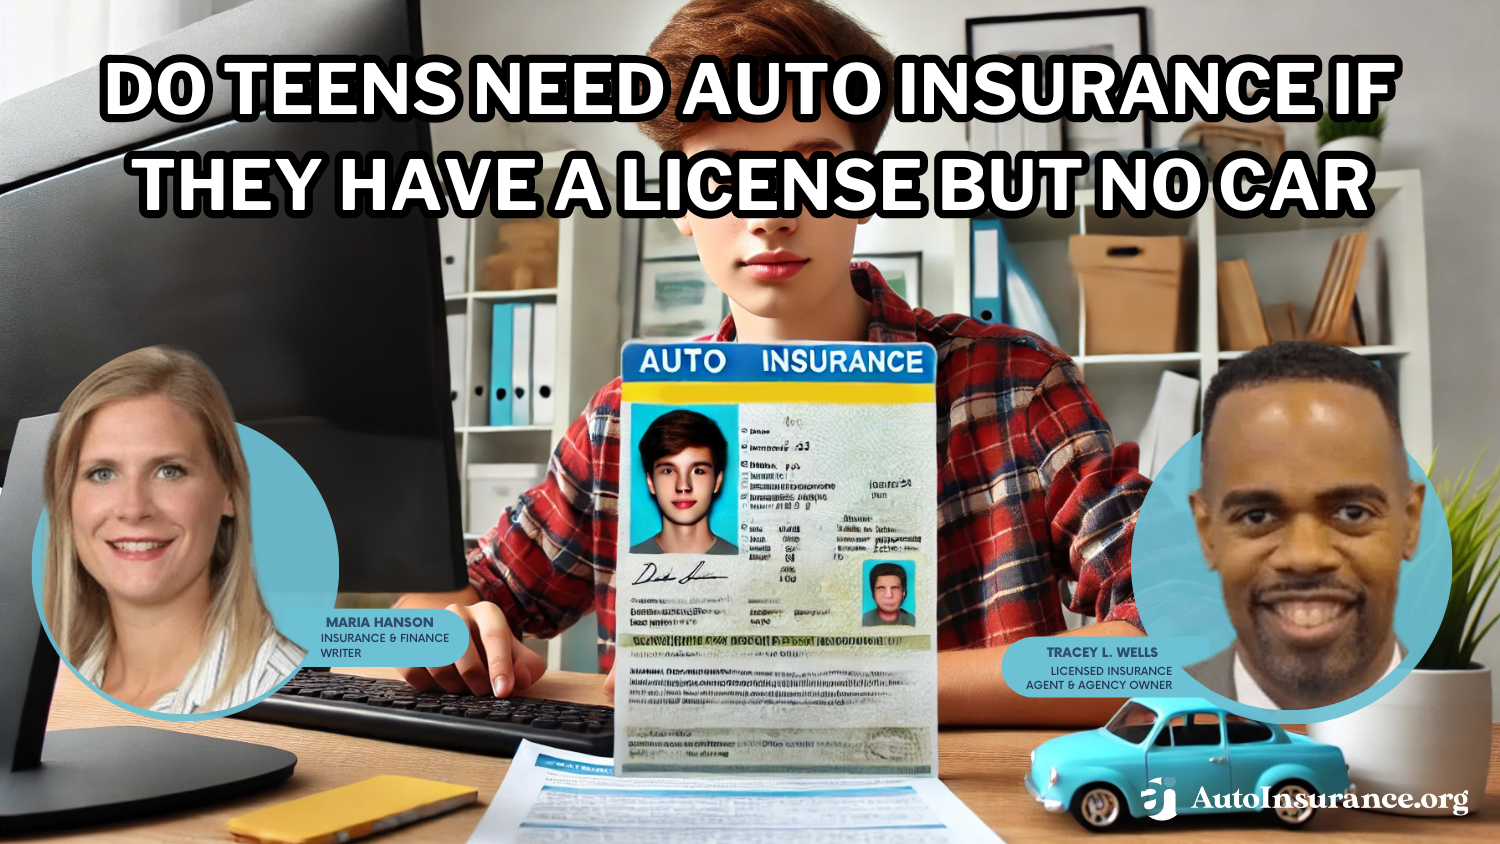 Do teens need auto insurance if they have a license but no car?